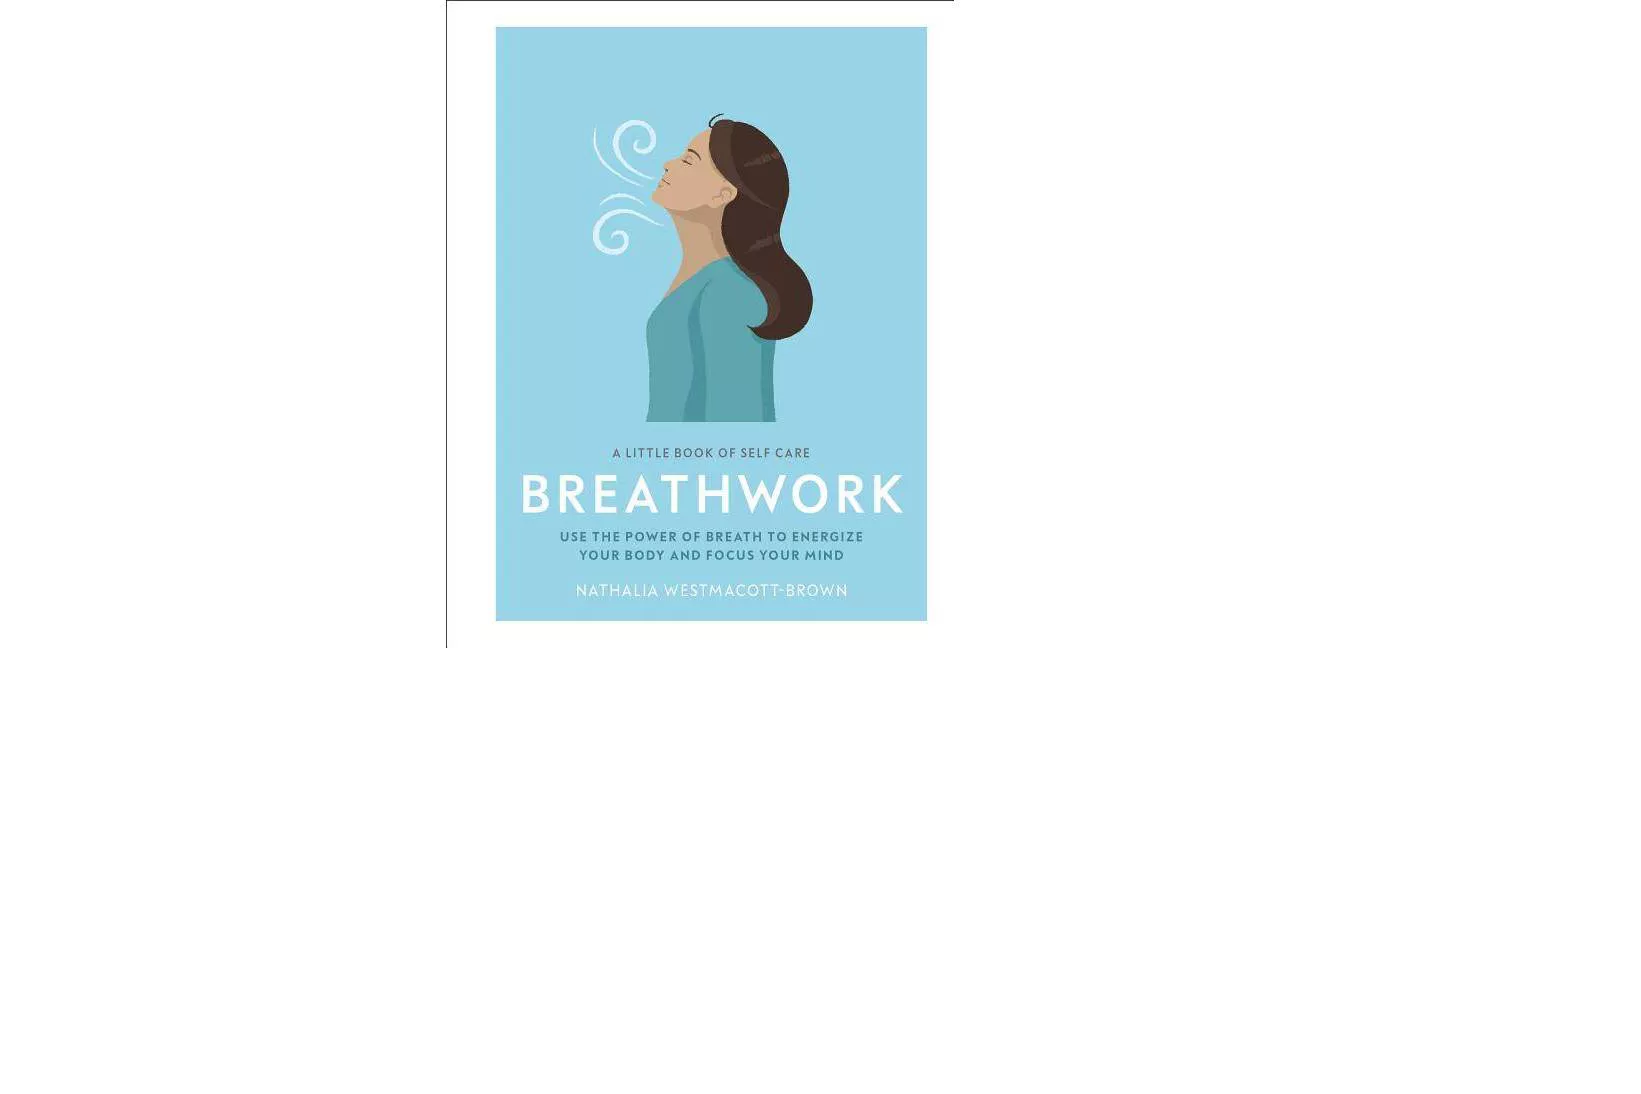 The anxious Friend - Anxiety is common for people during this time of year. Breathwork is a great way to calm some the jitters and JUST BREATHE.